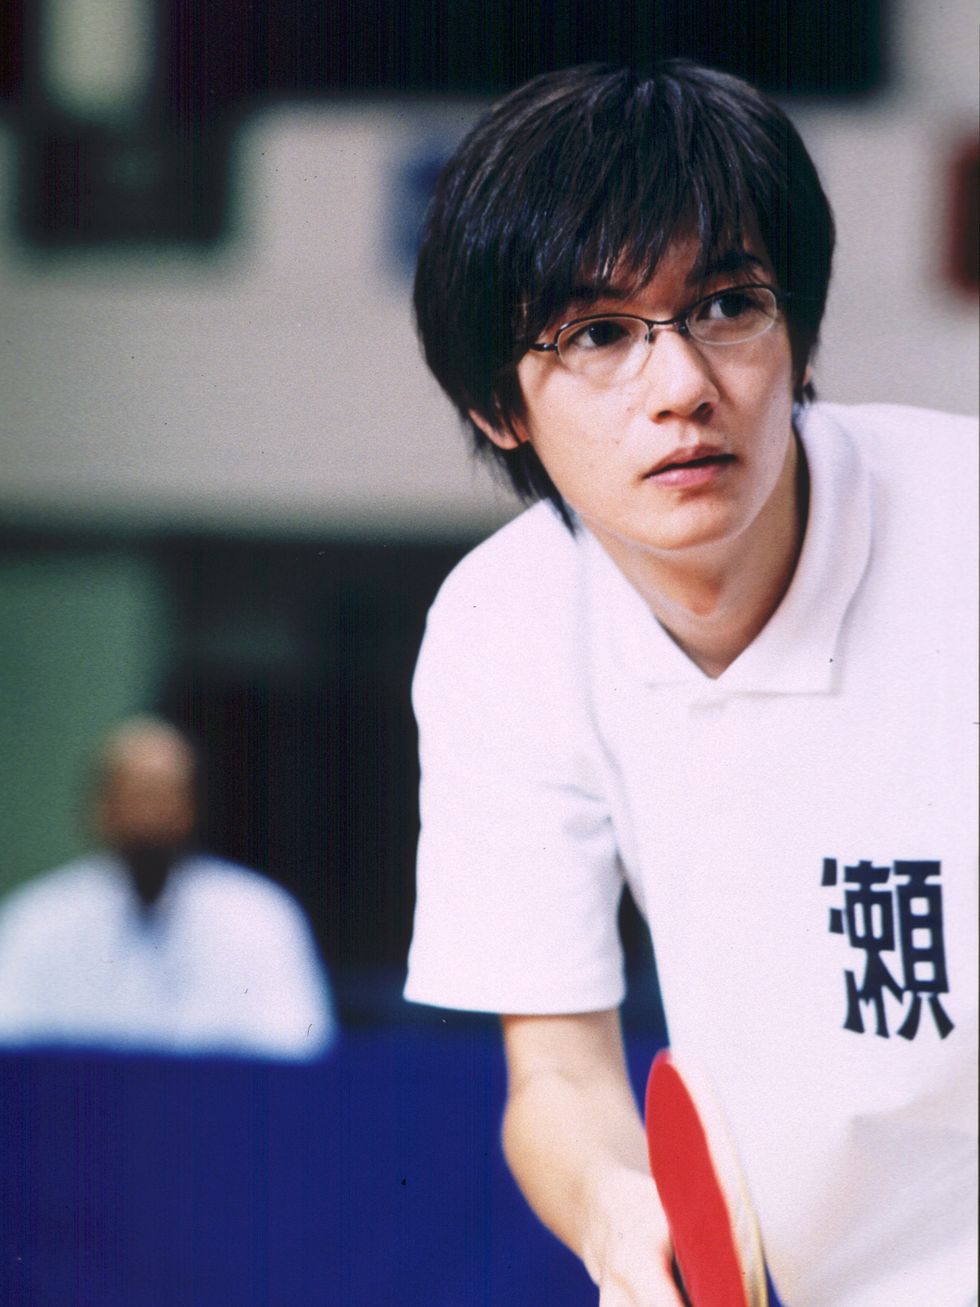 Glasses, Vision care, Sleeve, Bangs, T-shirt, Elbow, Black hair, Street fashion, Cool, Sports jersey, 